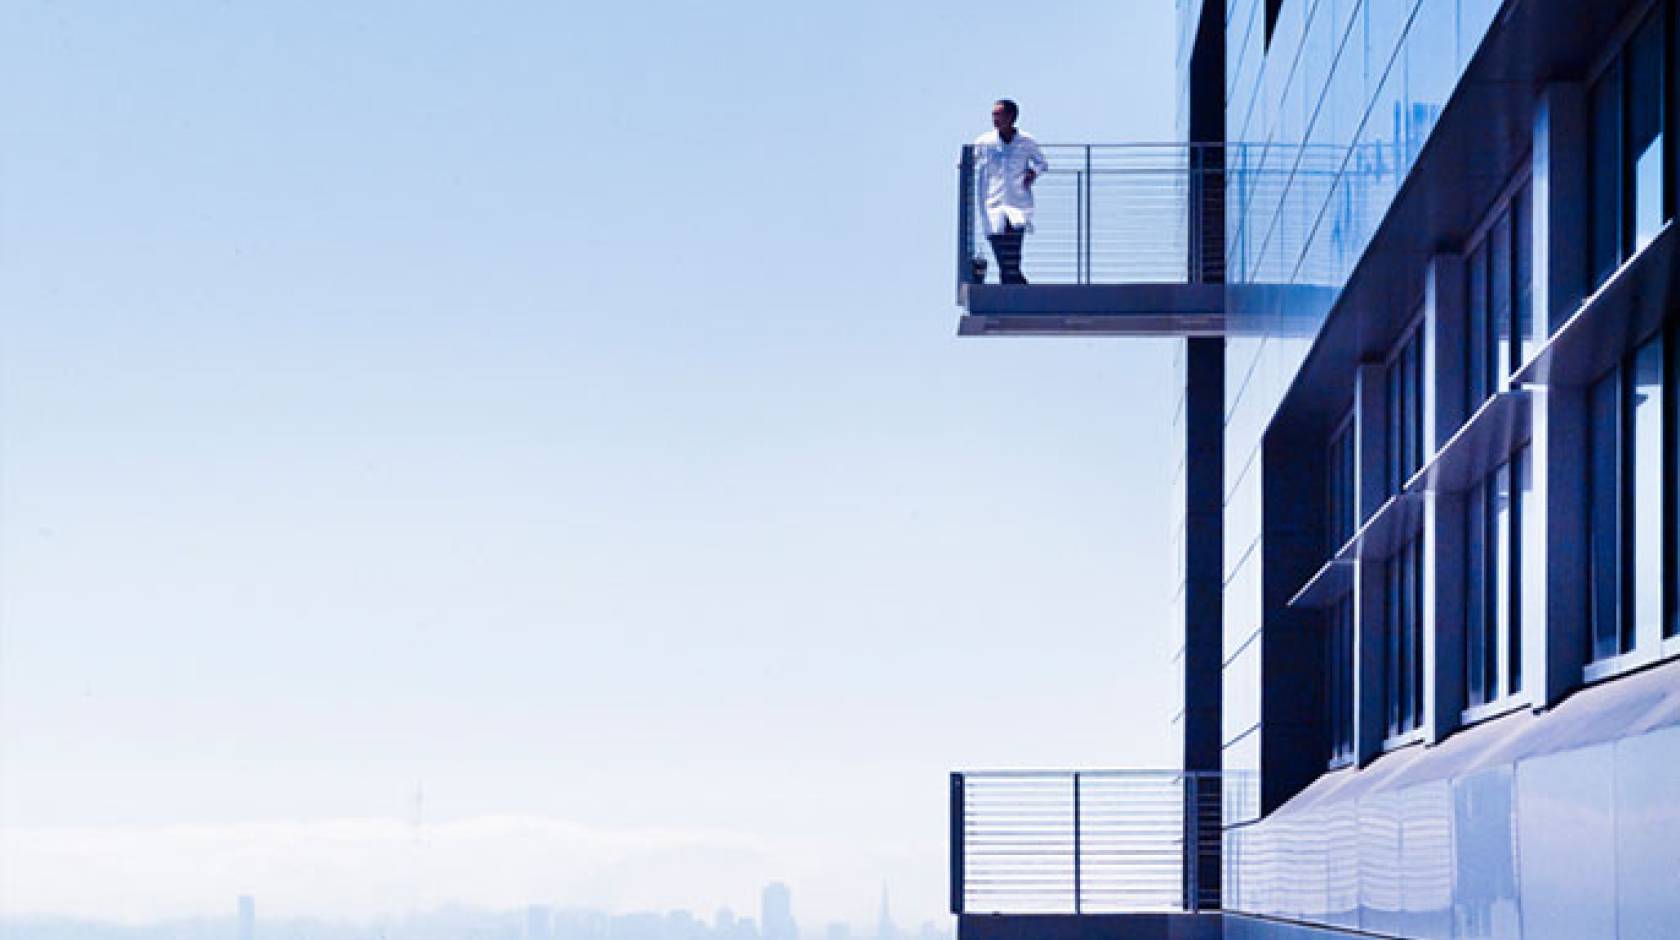 Researcher on a balcony with San Francisco skyline behind